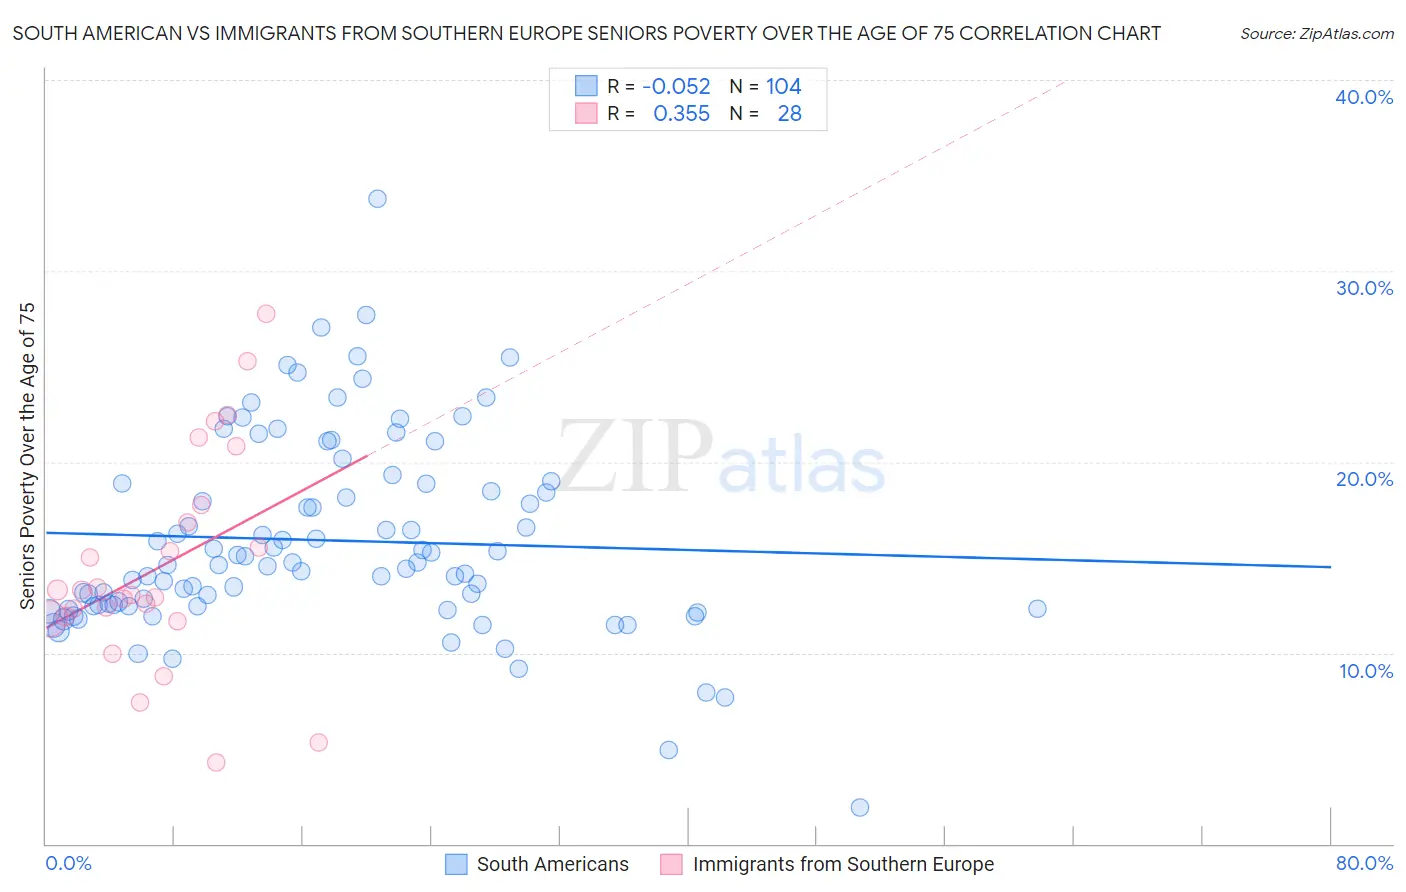 South American vs Immigrants from Southern Europe Seniors Poverty Over the Age of 75